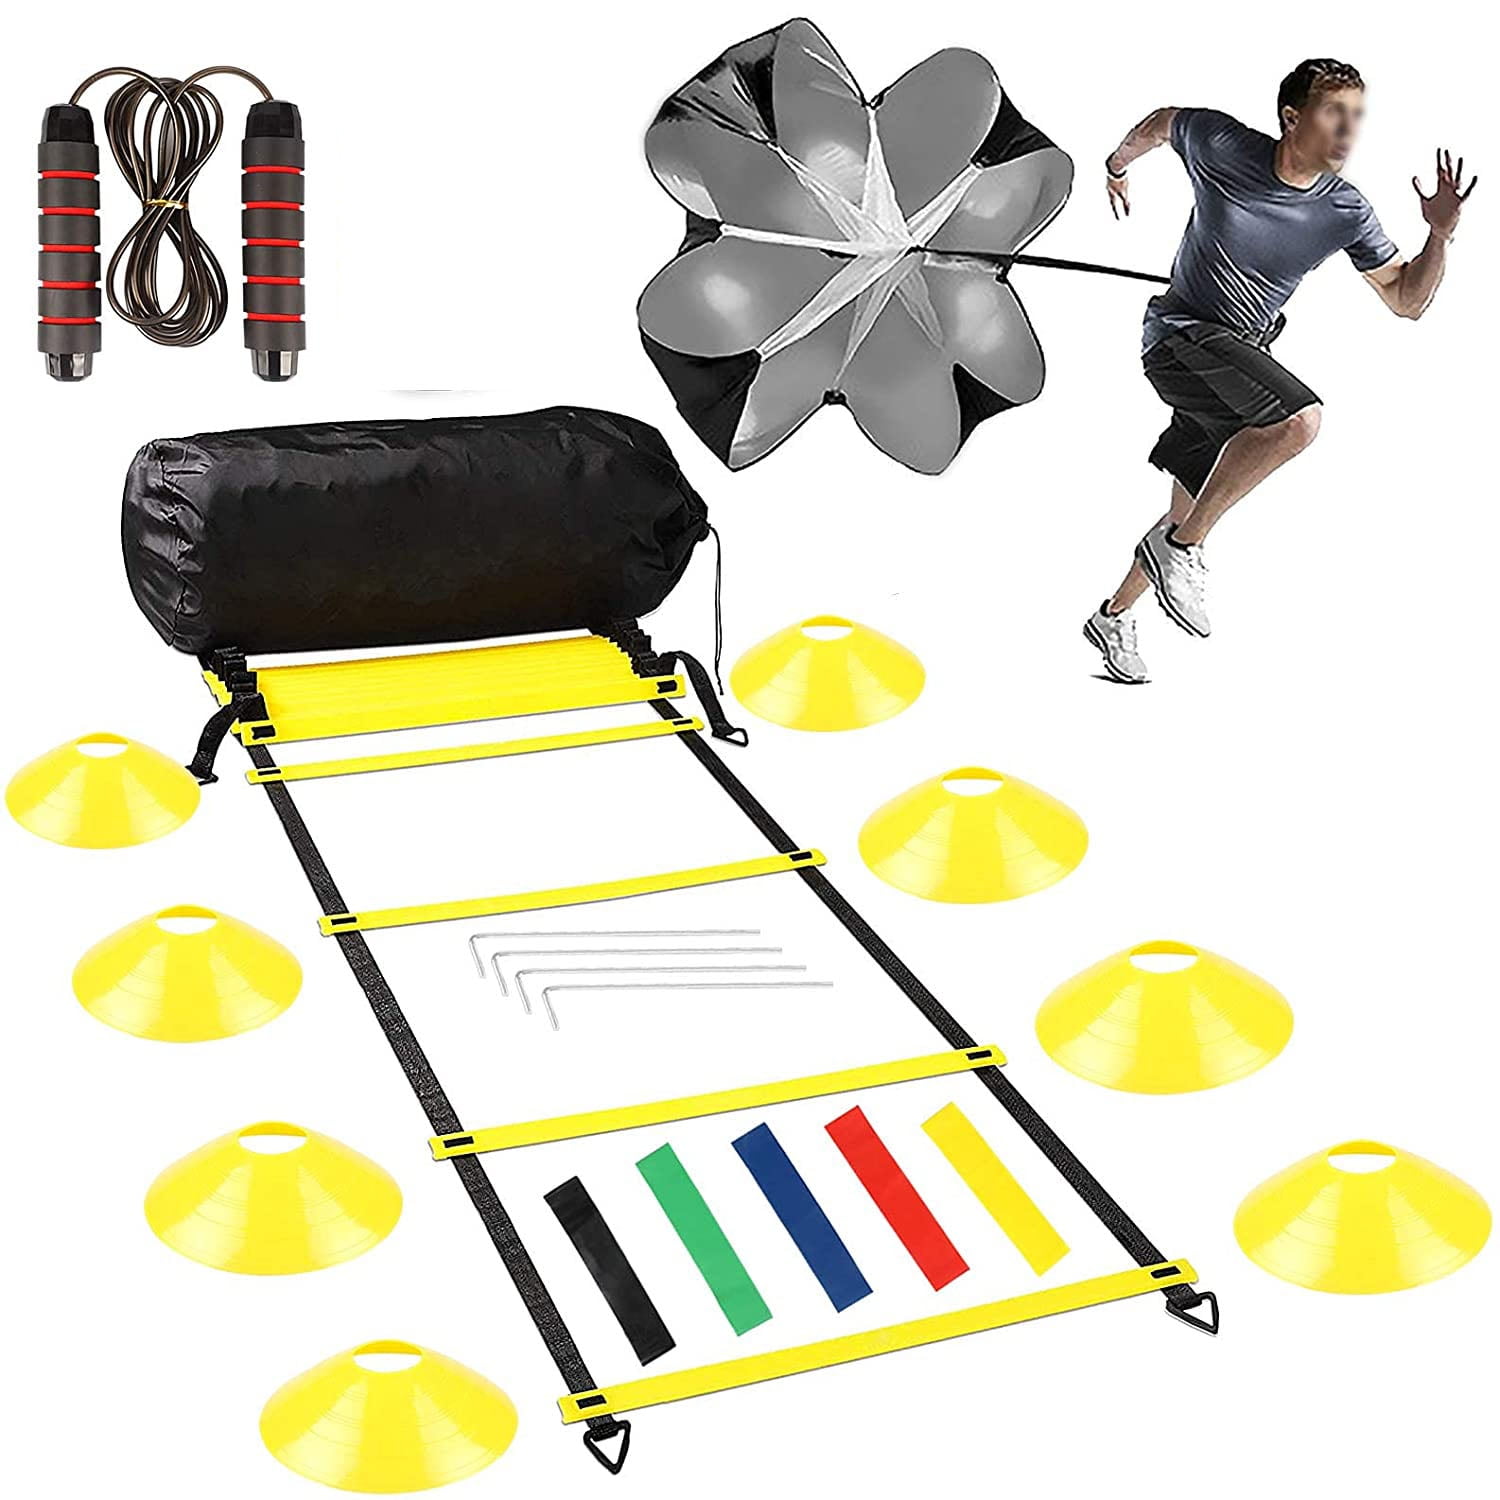 Agility Ladder Speed and Cone Bag Football Training Equipment Sports Team Set 